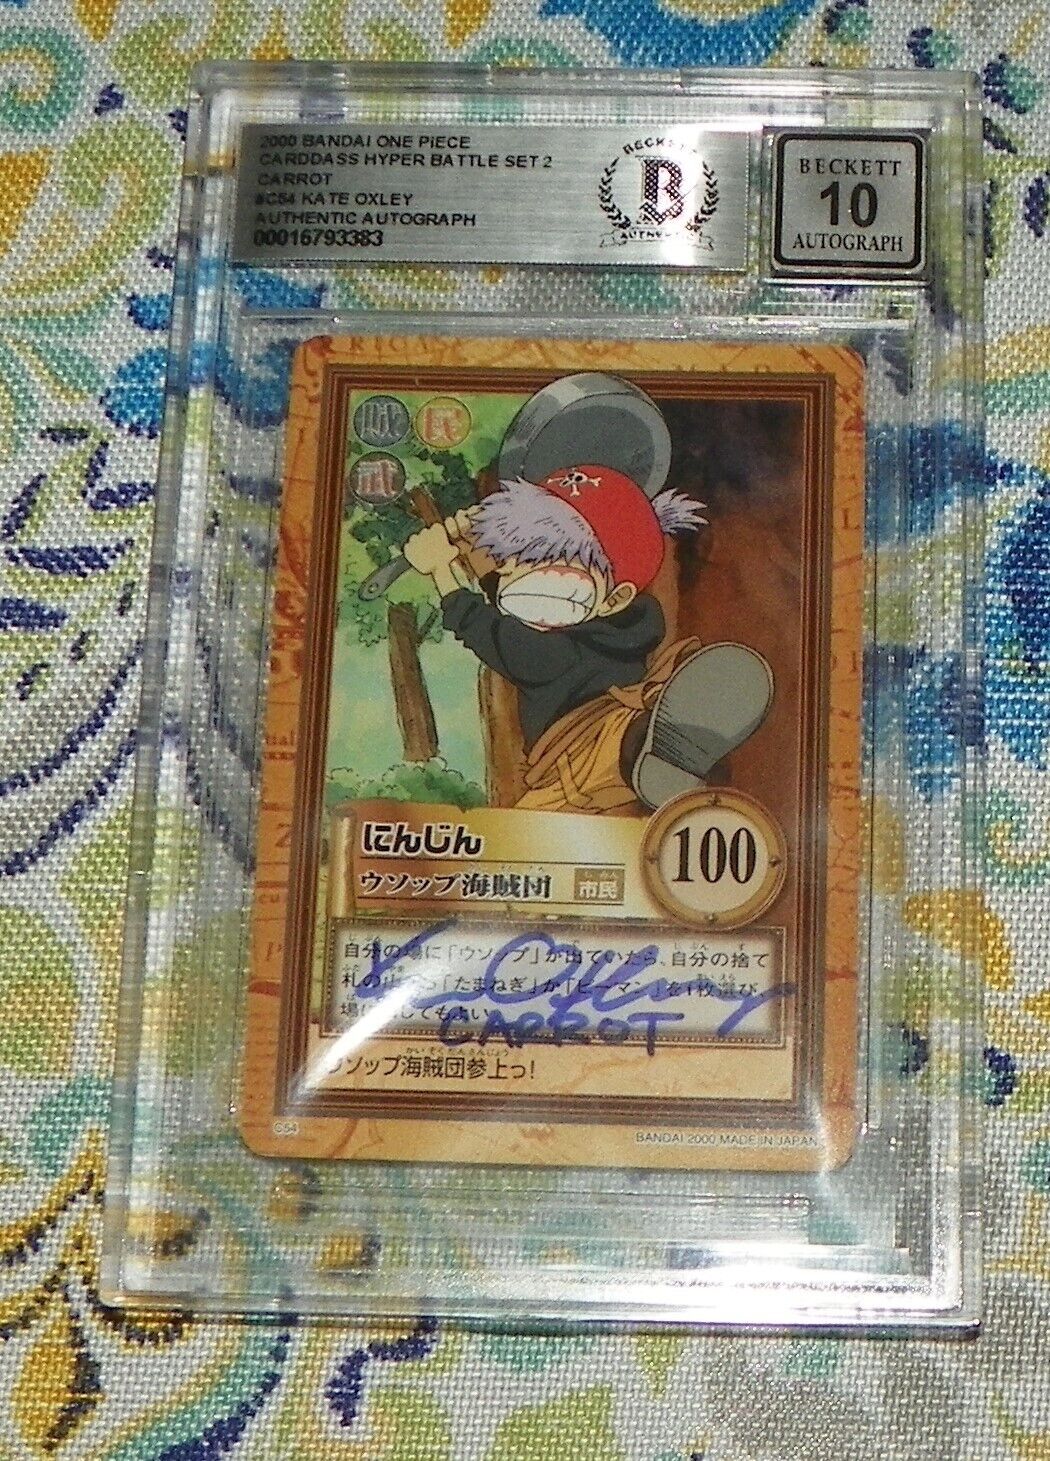 Kate Oxley Carrot One Piece Hyper Battle Signed Card 10 Auto Grade BAS C54 Japan